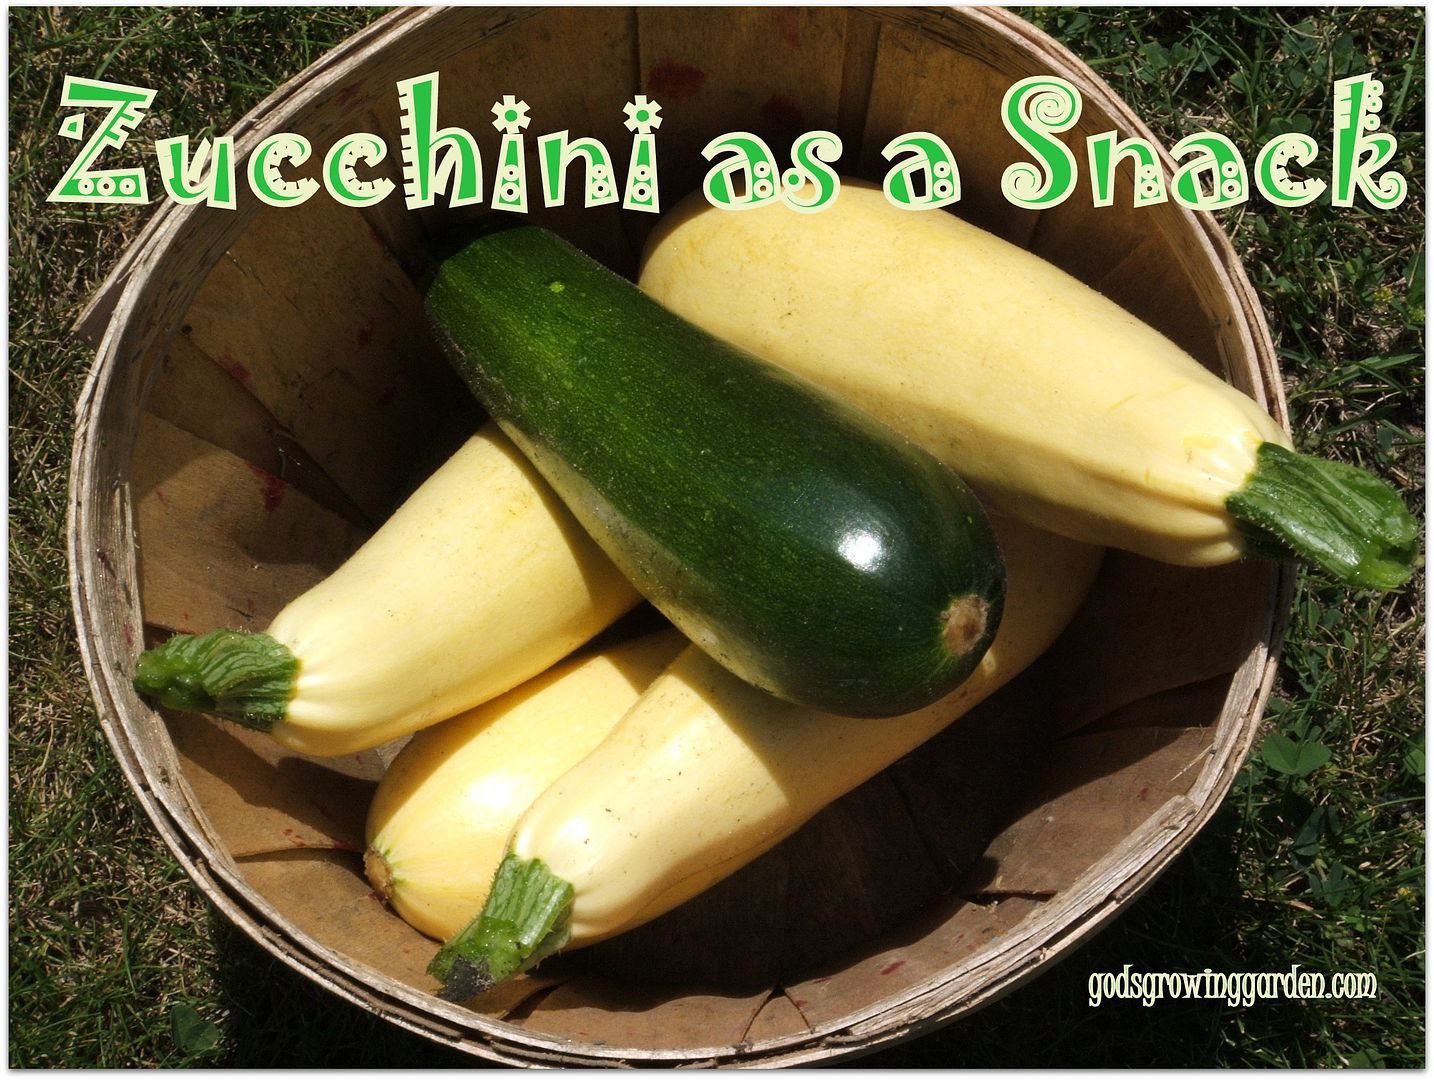 Zucchini by Angie Ouellette-Tower for godsgrowinggarden.com photo 014_zpscea0a345.jpg